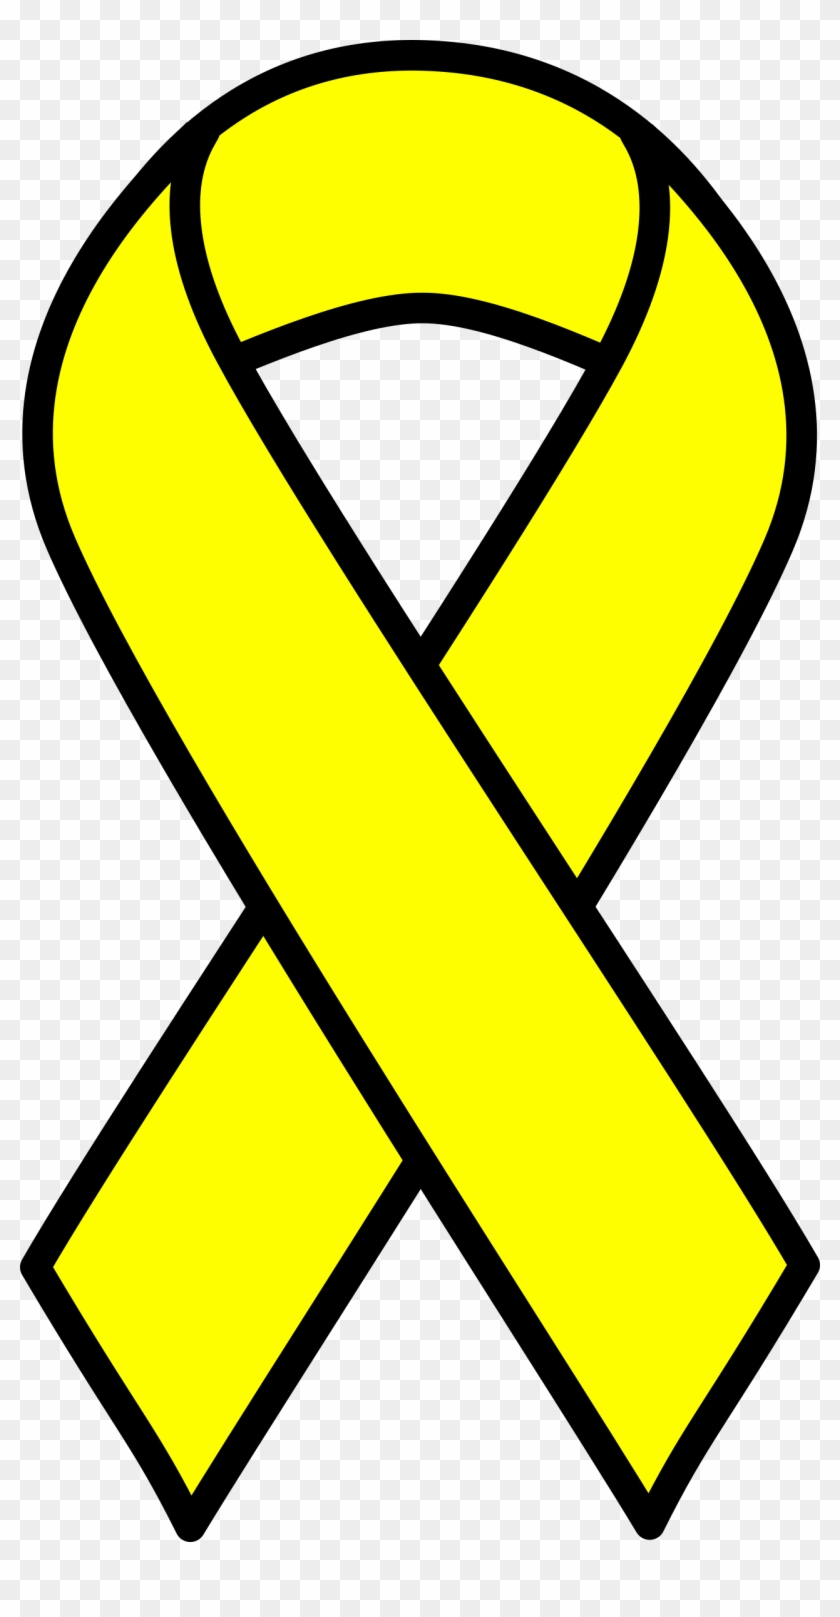 Yellow Cancer Ribbon - Outline Breast Cancer Ribbon Clipart